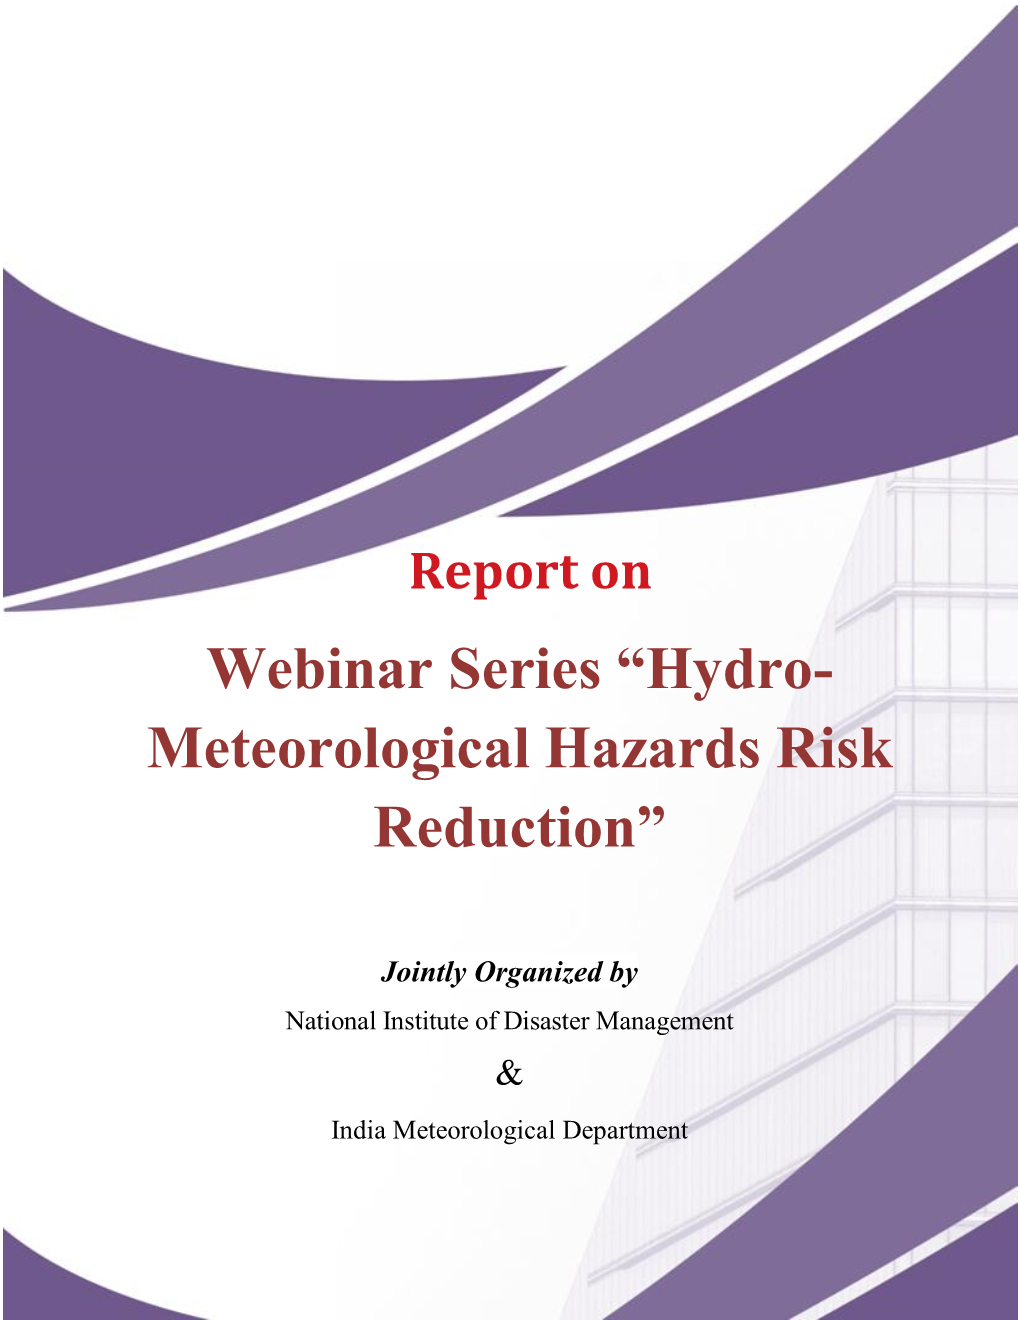 Hydro- Meteorological Hazards Risk Reduction”